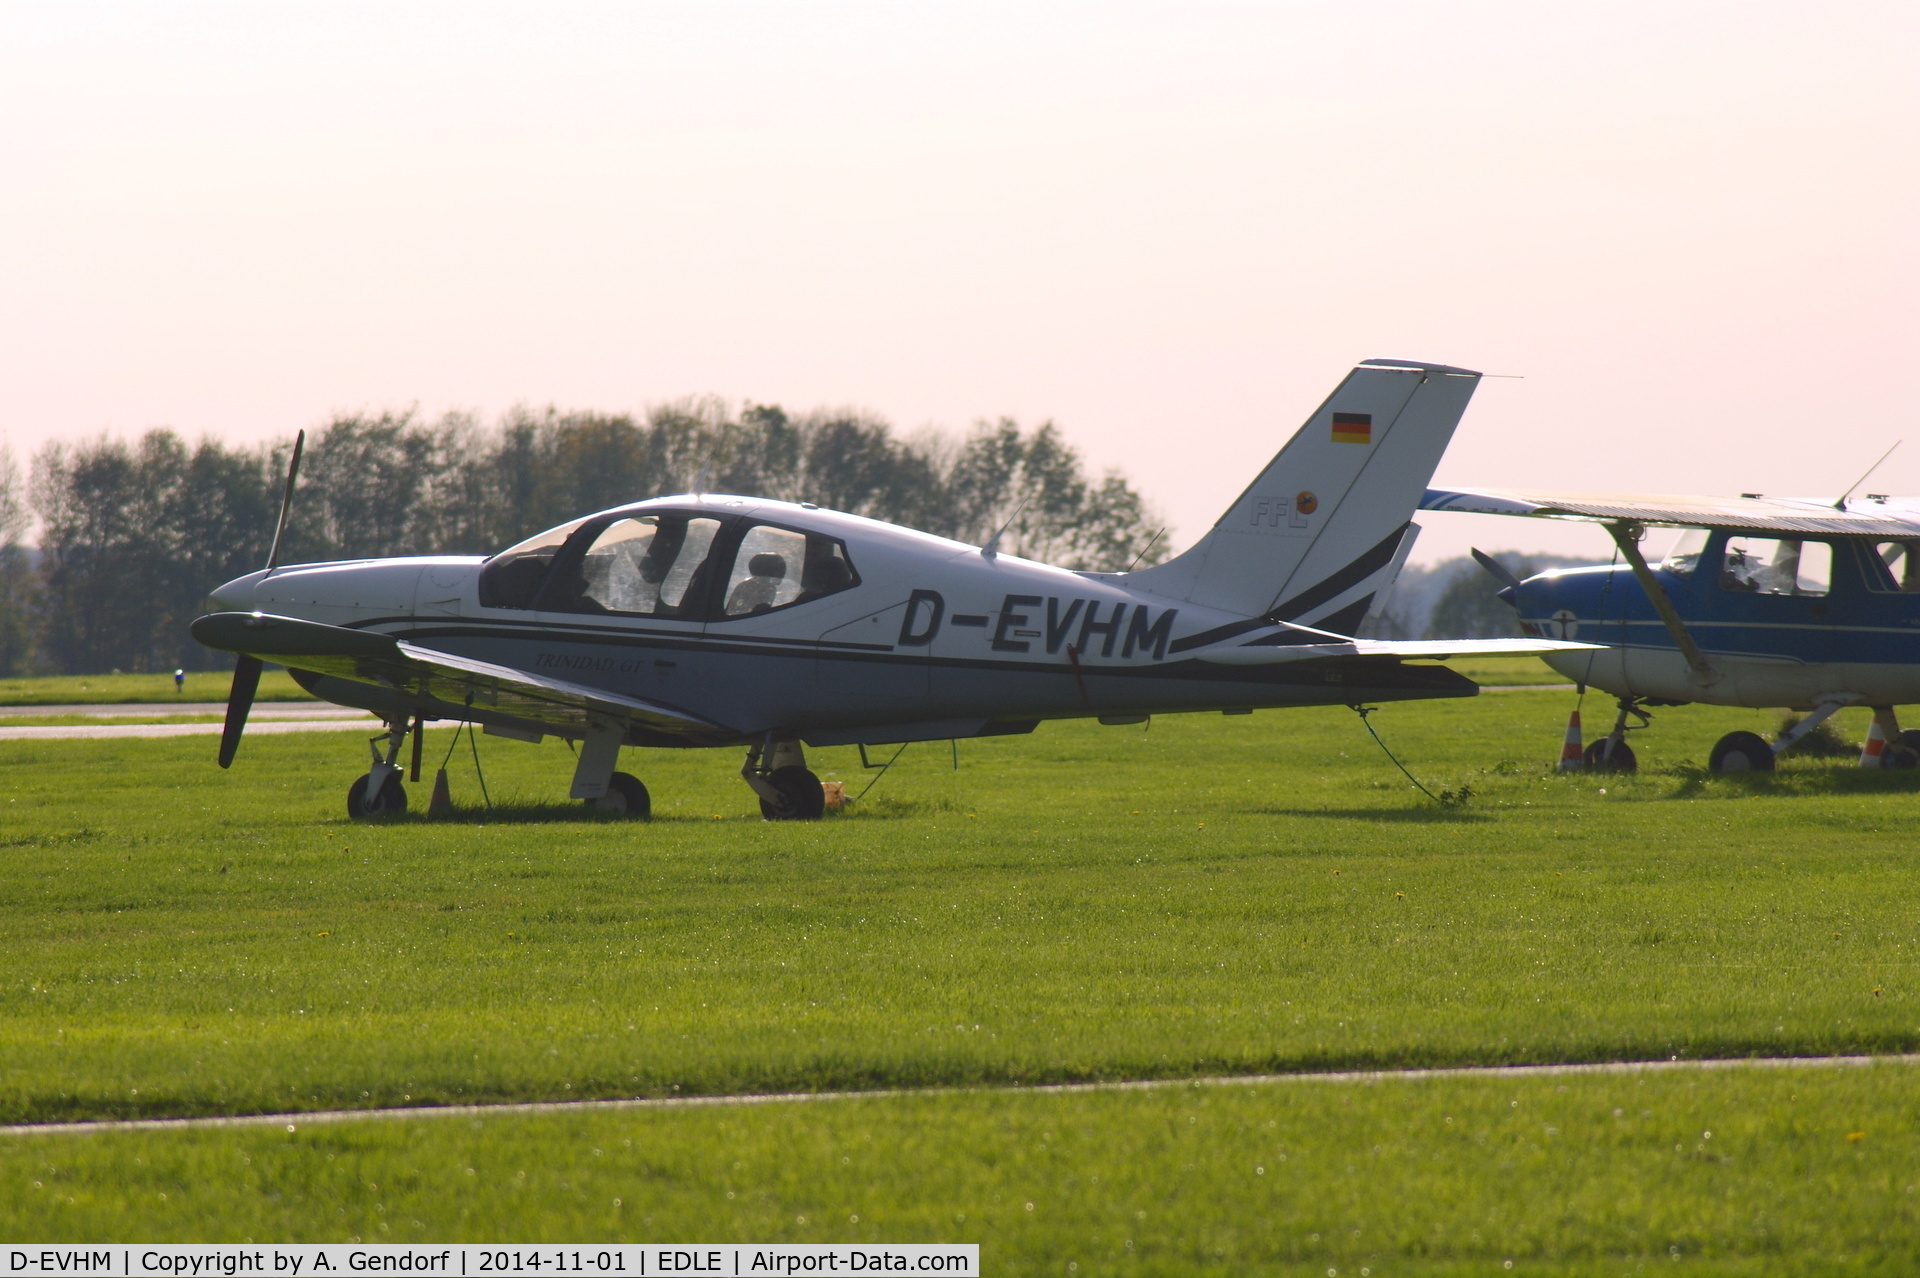 D-EVHM, 1998 Socata TB-20 Trinidad C/N 1837, Private (untitled), is here parked on the grass apron of the regional airport Essen / Mülheim(EDLE)